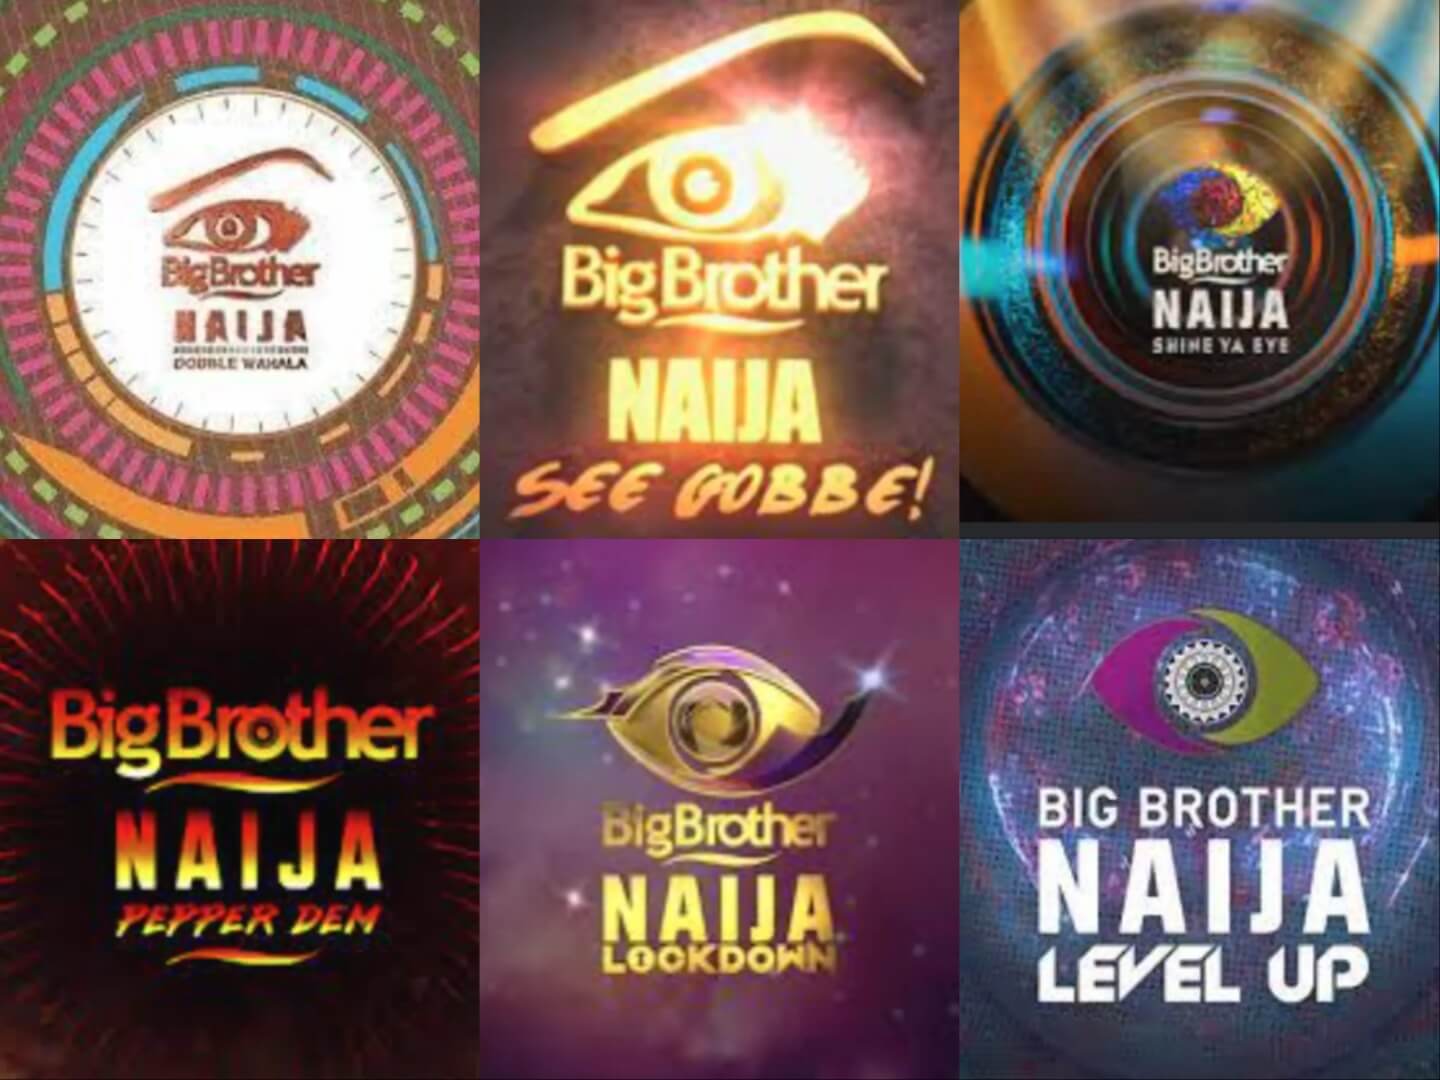 Which was your favourite Big Brother Naija Season?